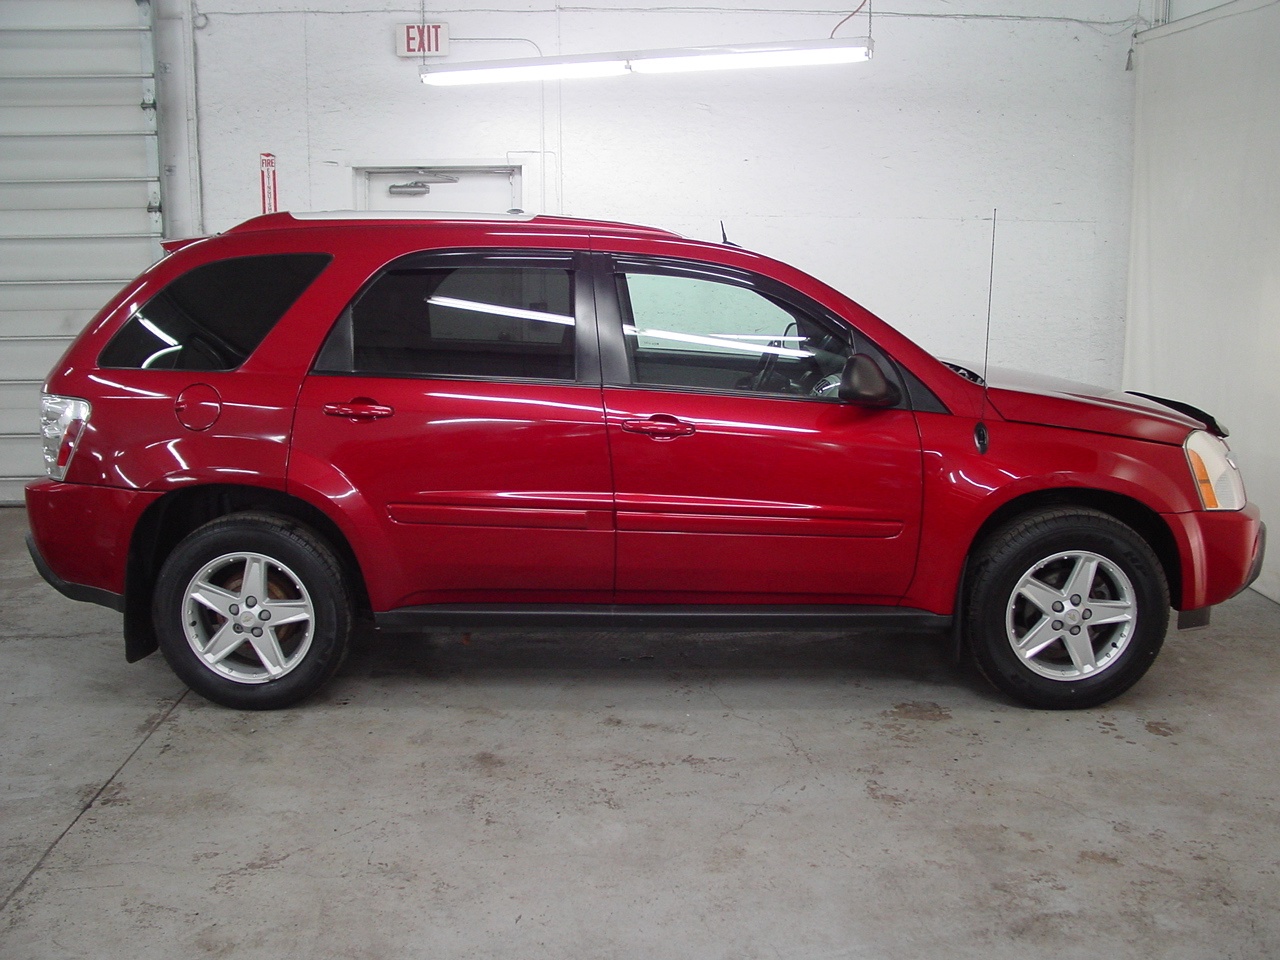 2005 Chevrolet Equinox LT - Biscayne Auto Sales | Pre-owned Dealership |  Ontario, NY